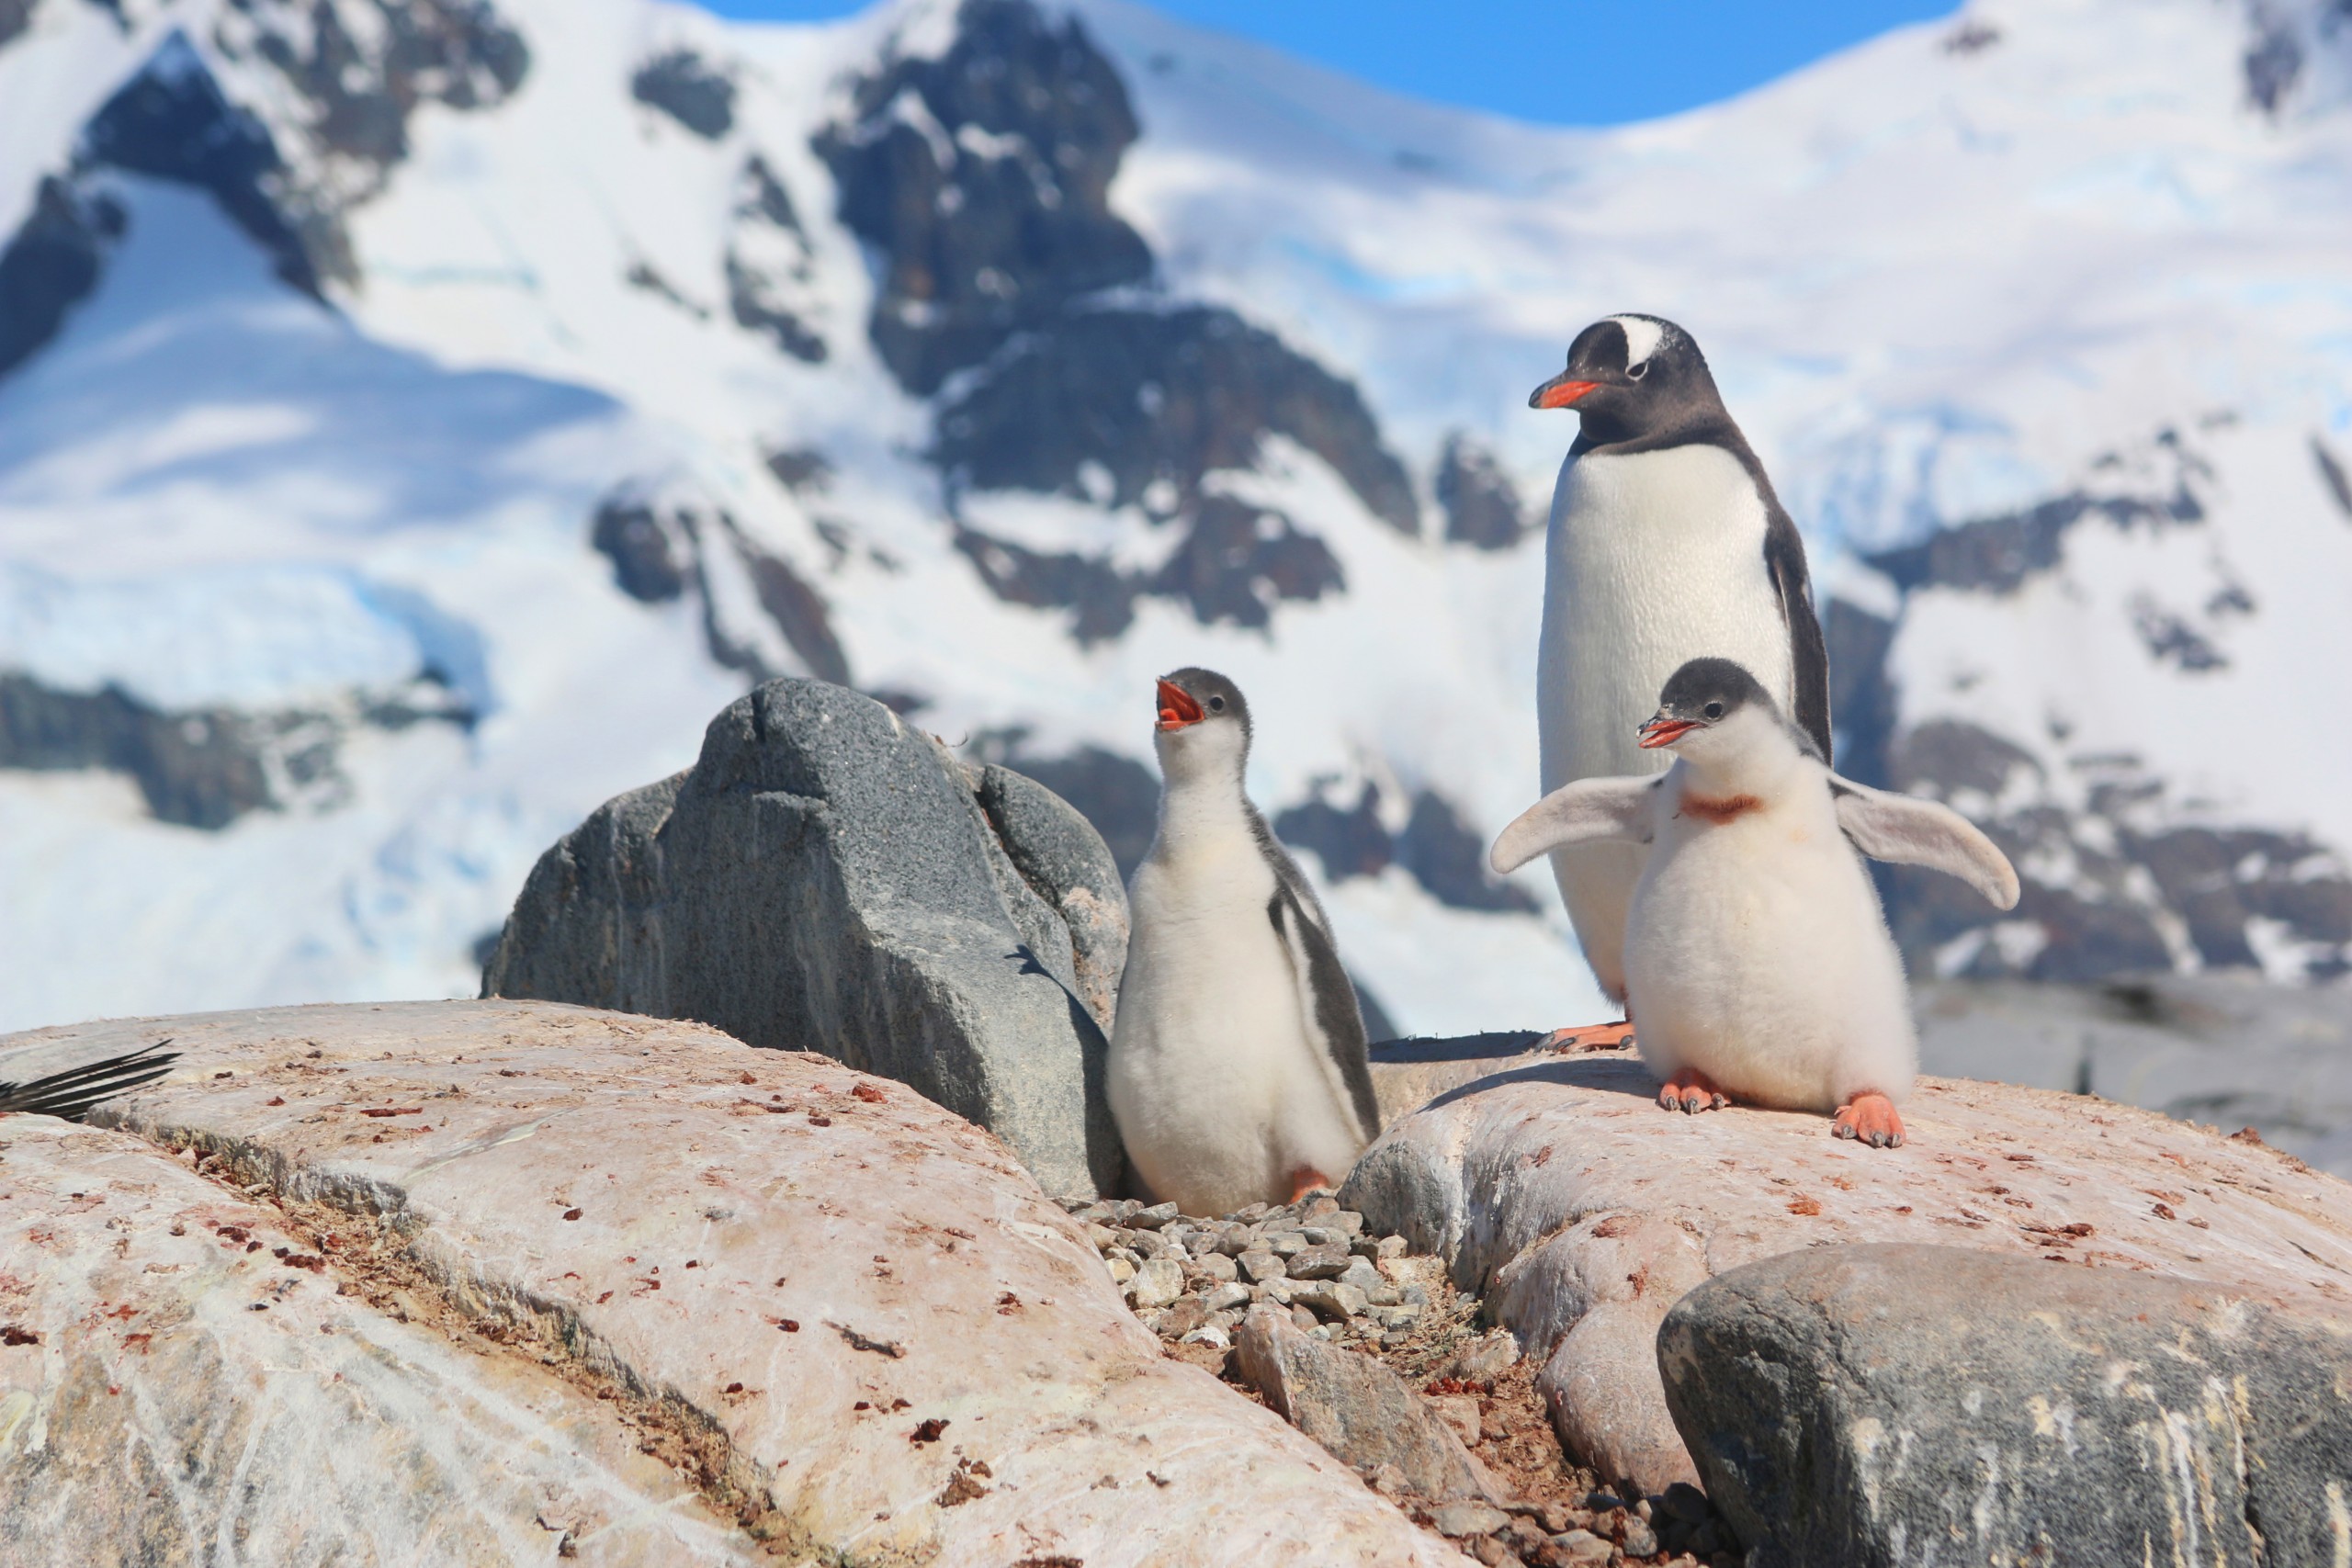 Peter Rise’s photo of the tuxedoed residents of Petermann Island, Antarctica, won third place in Natural Landscapes & Seascapes.